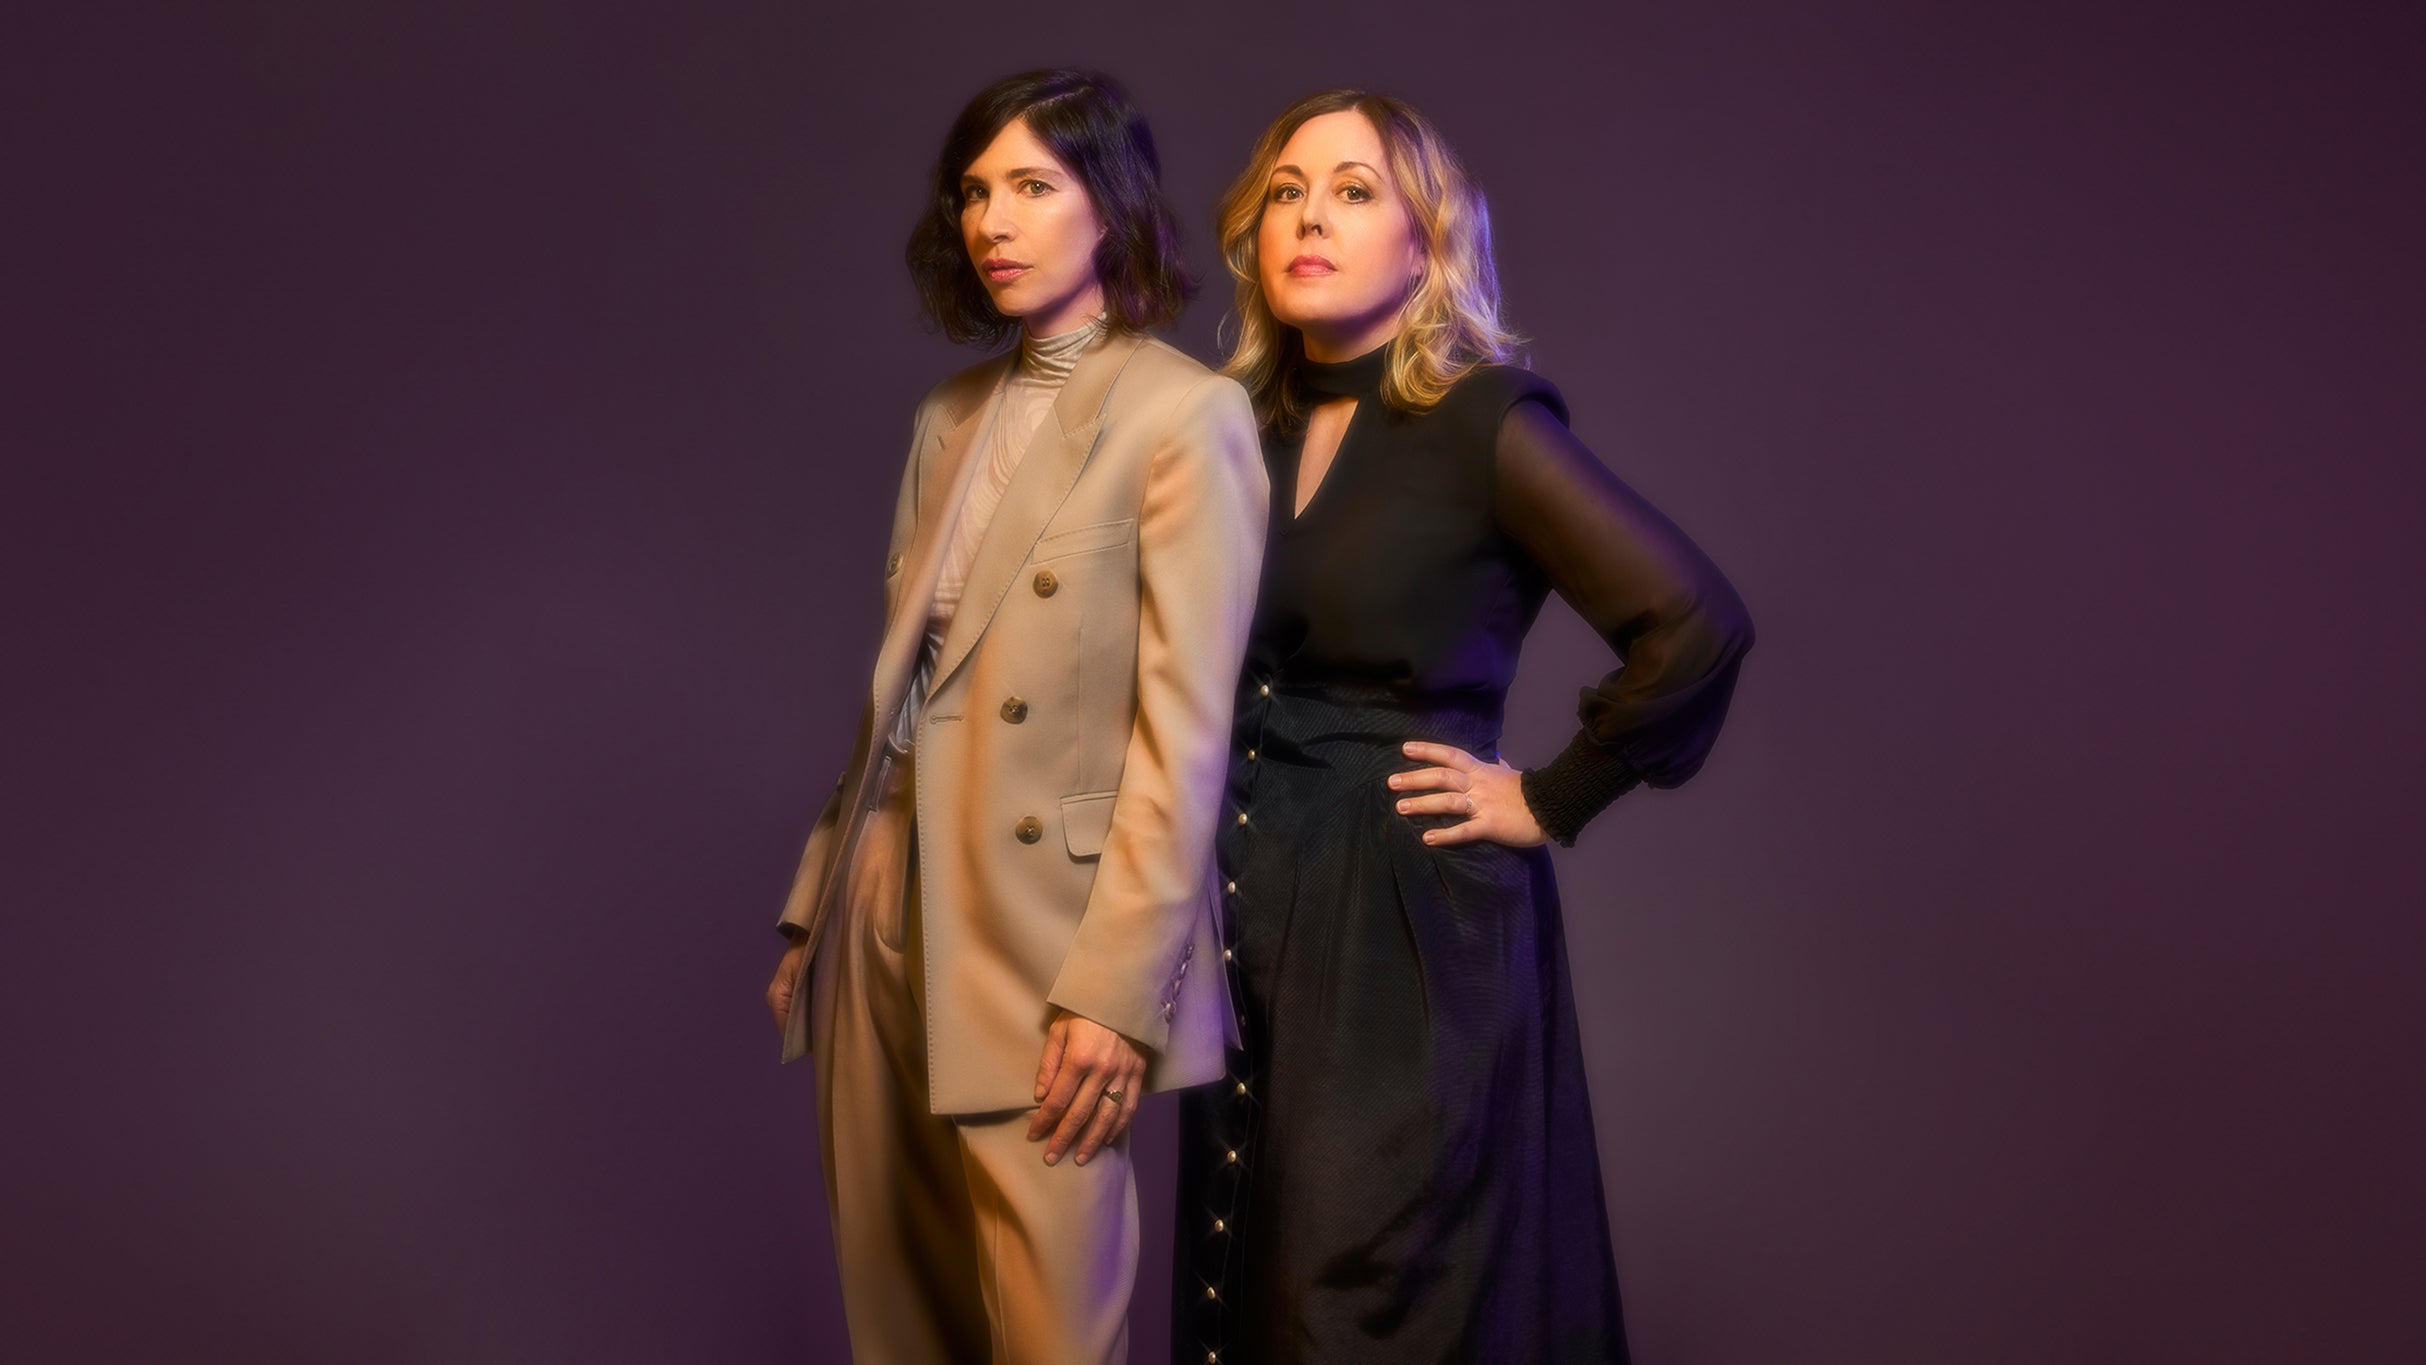 Main image for event titled Sleater-Kinney: Little Rope Tour